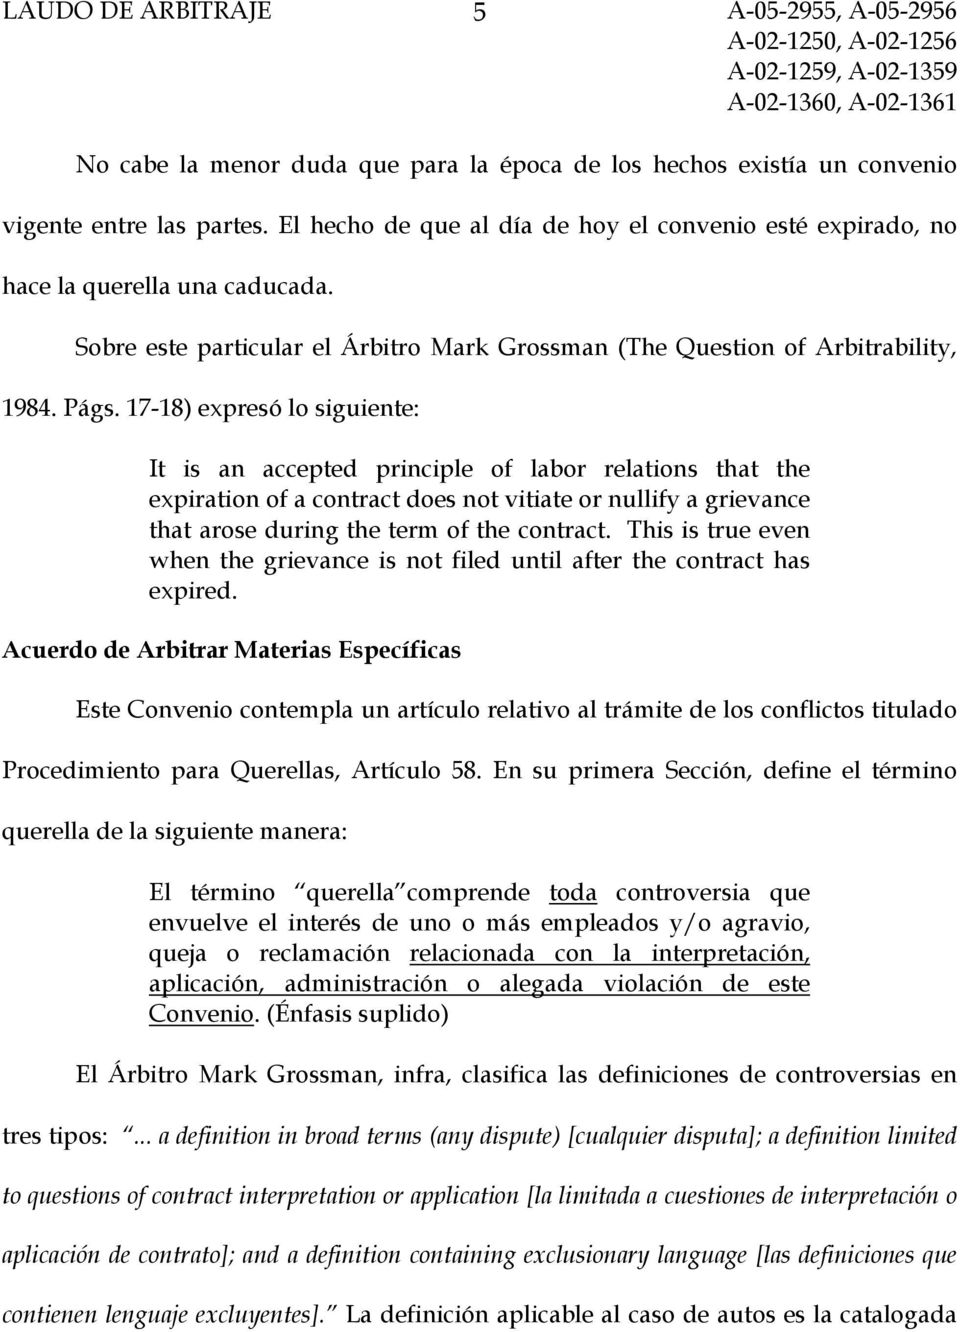 17-18) expresó lo siguiente: It is an accepted principle of labor relations that the expiration of a contract does not vitiate or nullify a grievance that arose during the term of the contract.